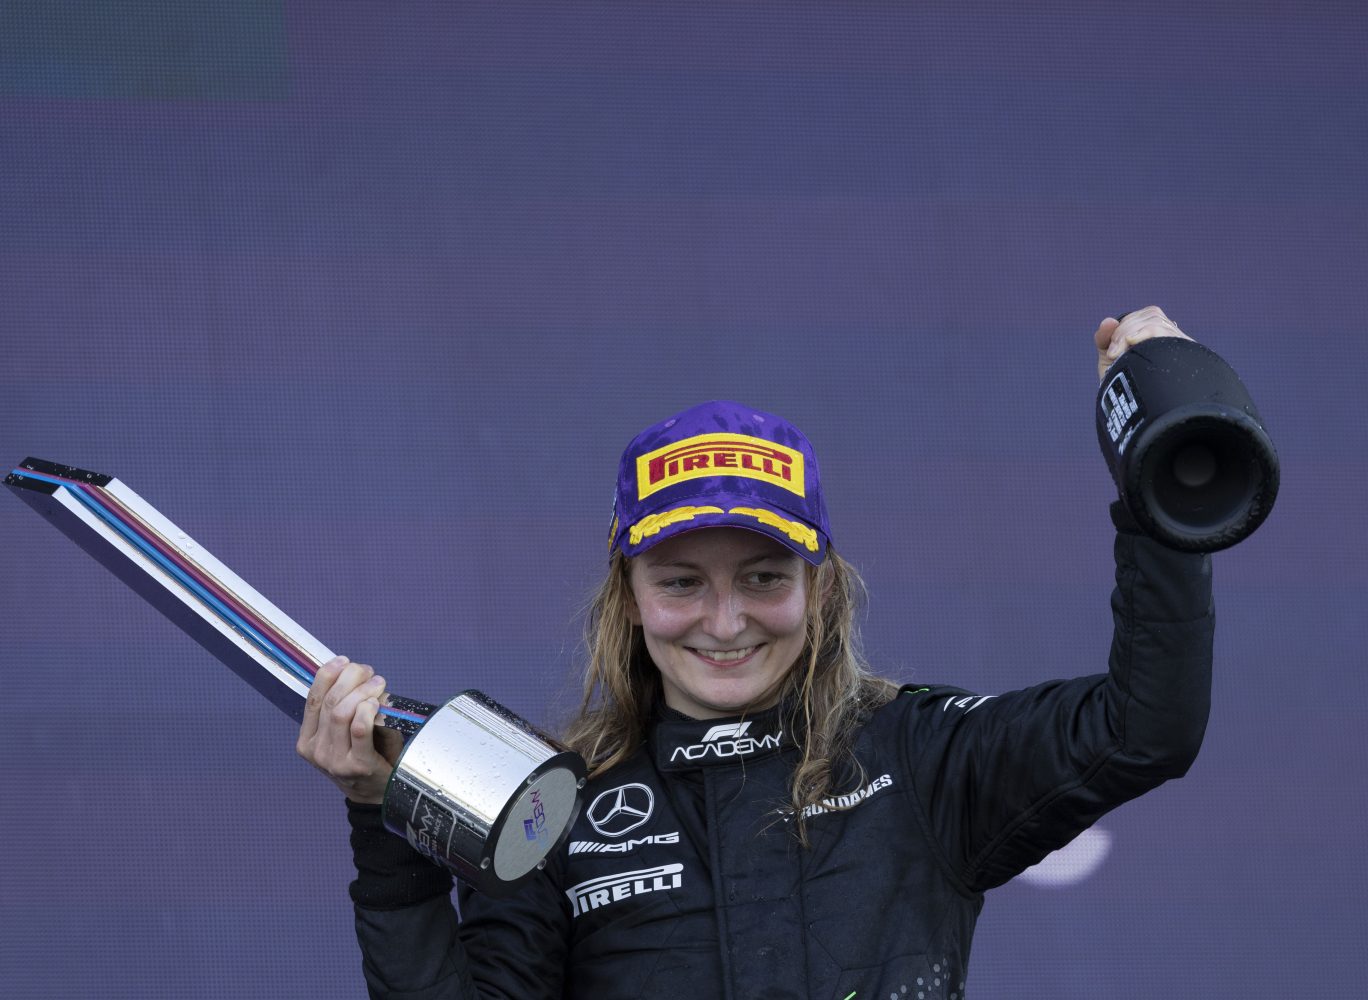 IMPRESSIVE DEBUT WEEKEND FOR IRON DAME DORIANE PIN IN F1 ACADEMY